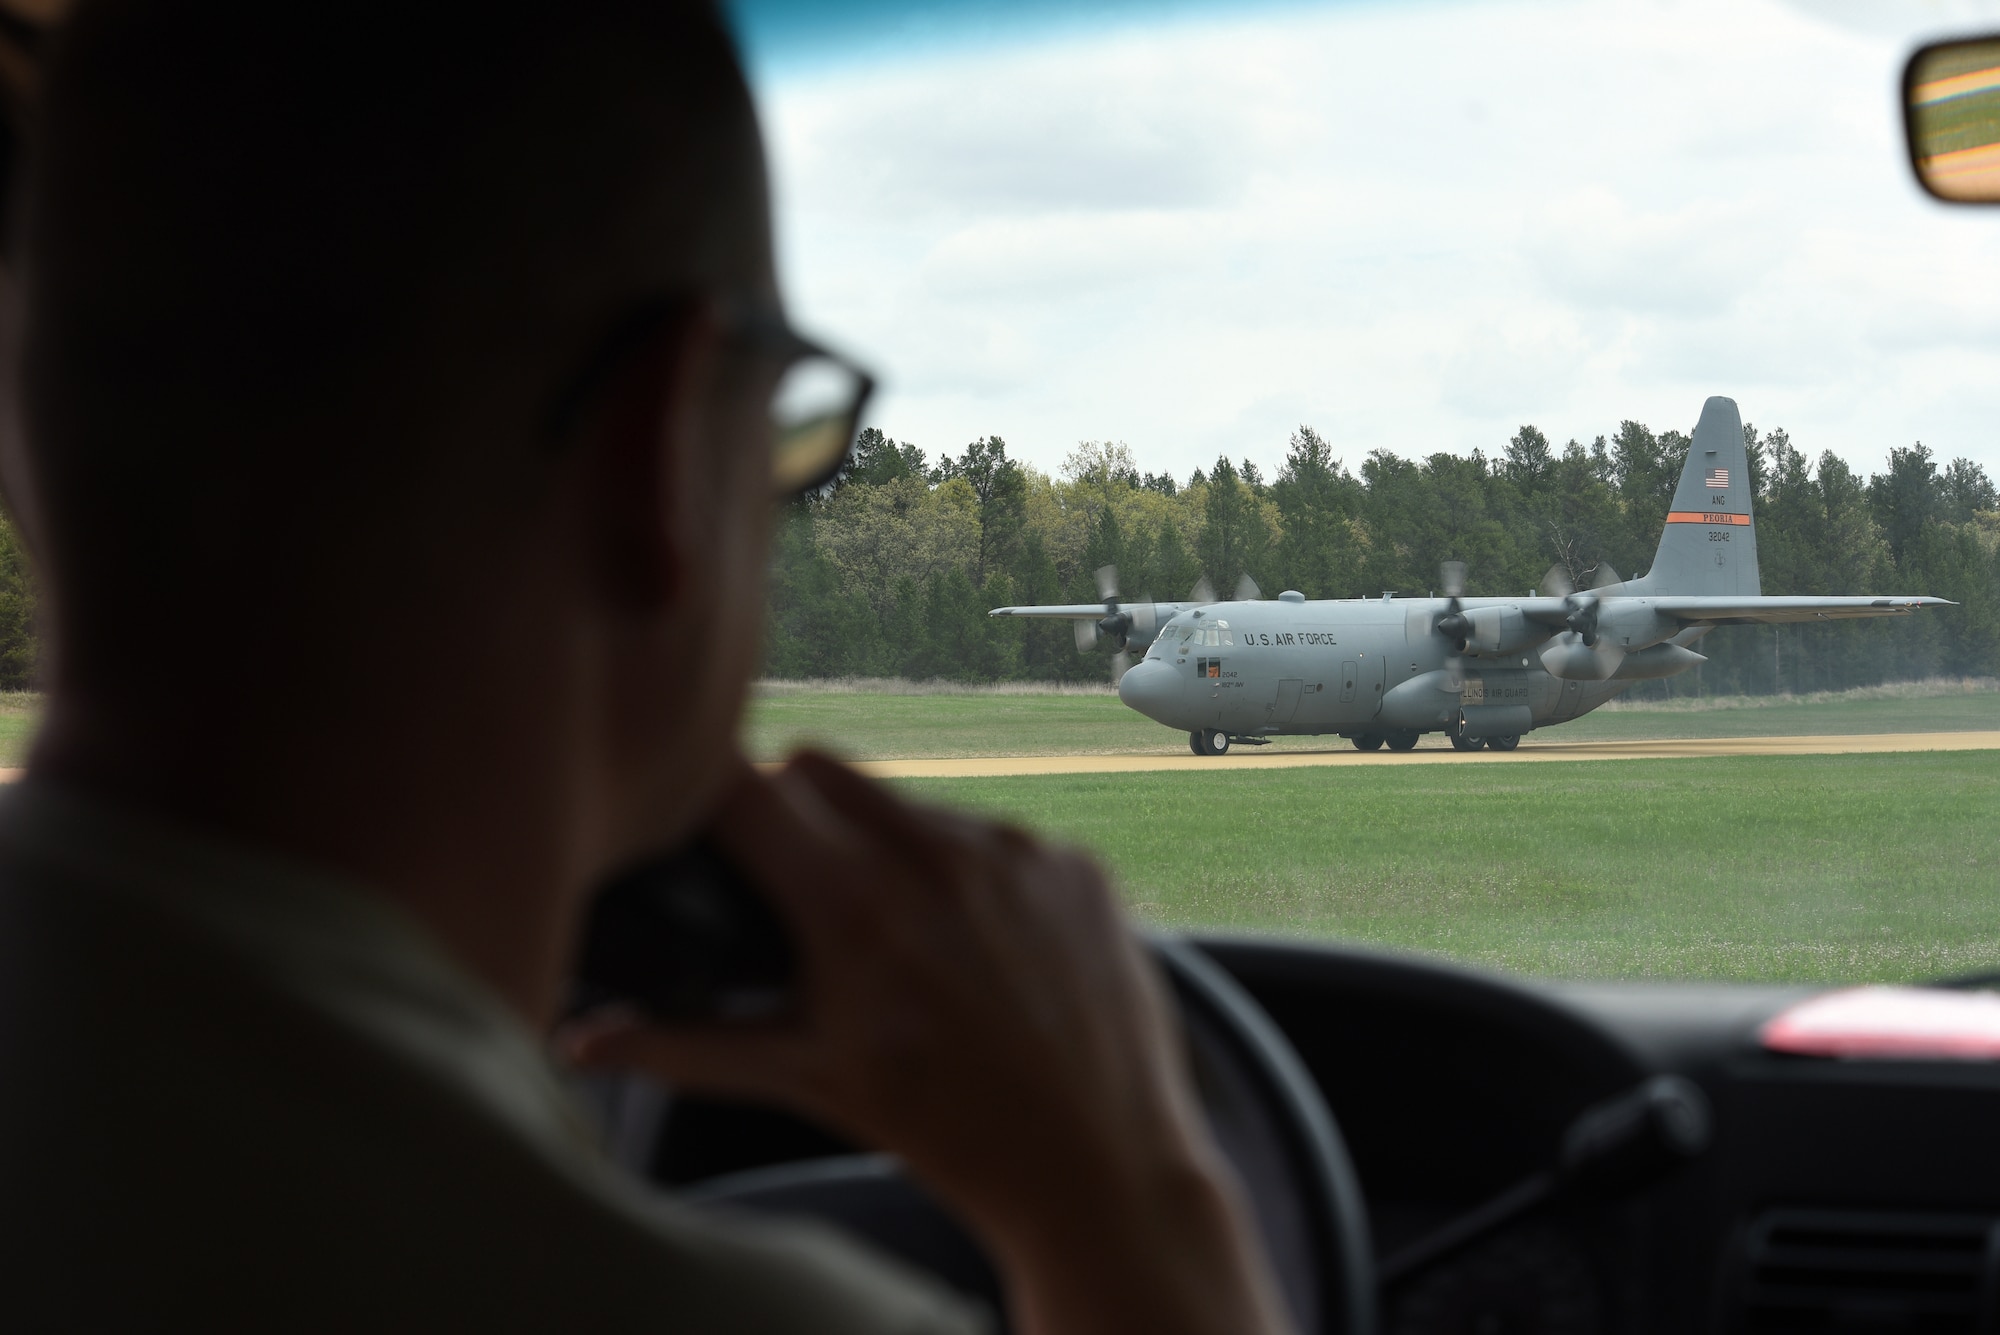 U.S. Air Force Senior Master Sgt. Brent Bixby, an airfield management superintendent with the 182nd Airlift Wing, Illinois Air National Guard, communicates via radio to the pilot of a C-130 Hercules as it taxis at Young Landing Zone at Fort McCoy, Wis. May 14, 2018. A number of pilots were qualifying to complete their unimproved landing certification. (U.S. Air National Guard photo by Master Sgt. Todd A. Pendleton)